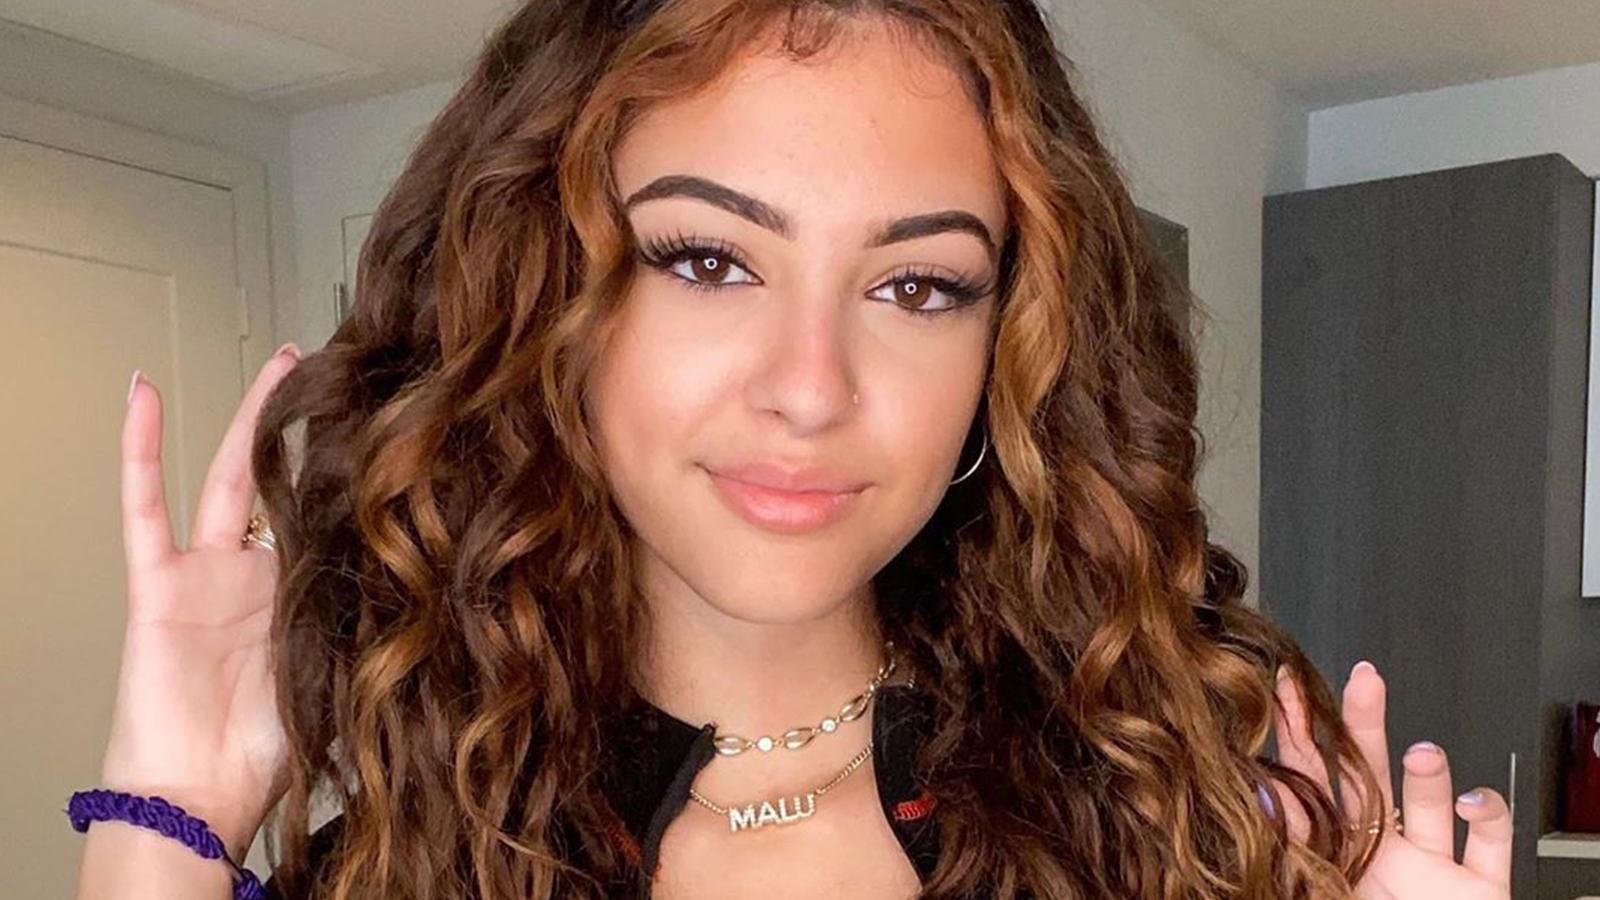 Malu Trevejo’s Boob Job – Before and After Images